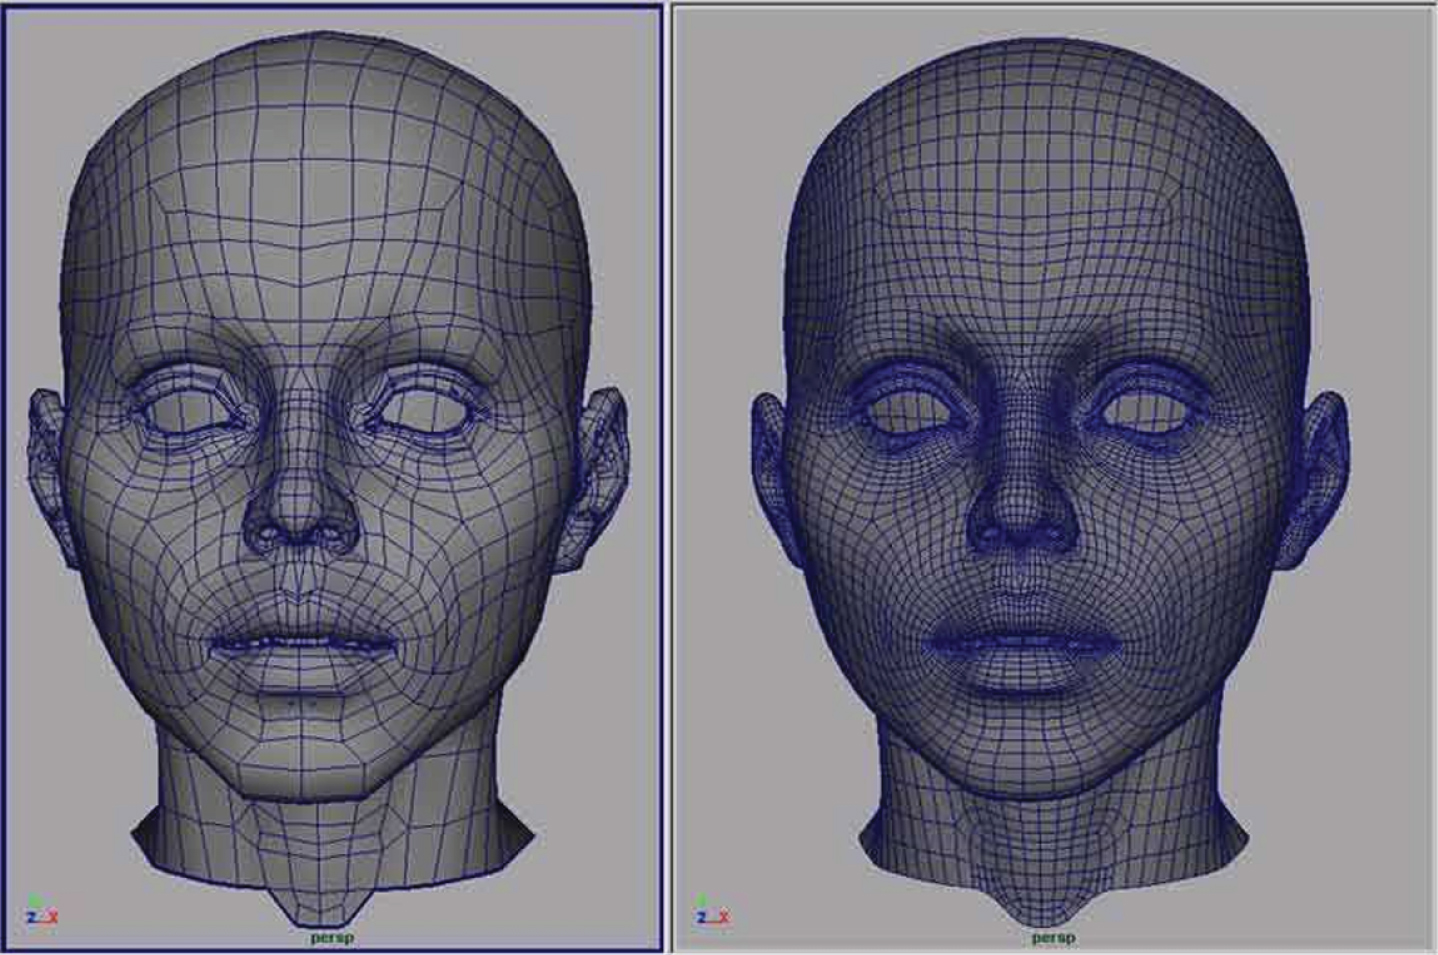 The modeling the head of a character.